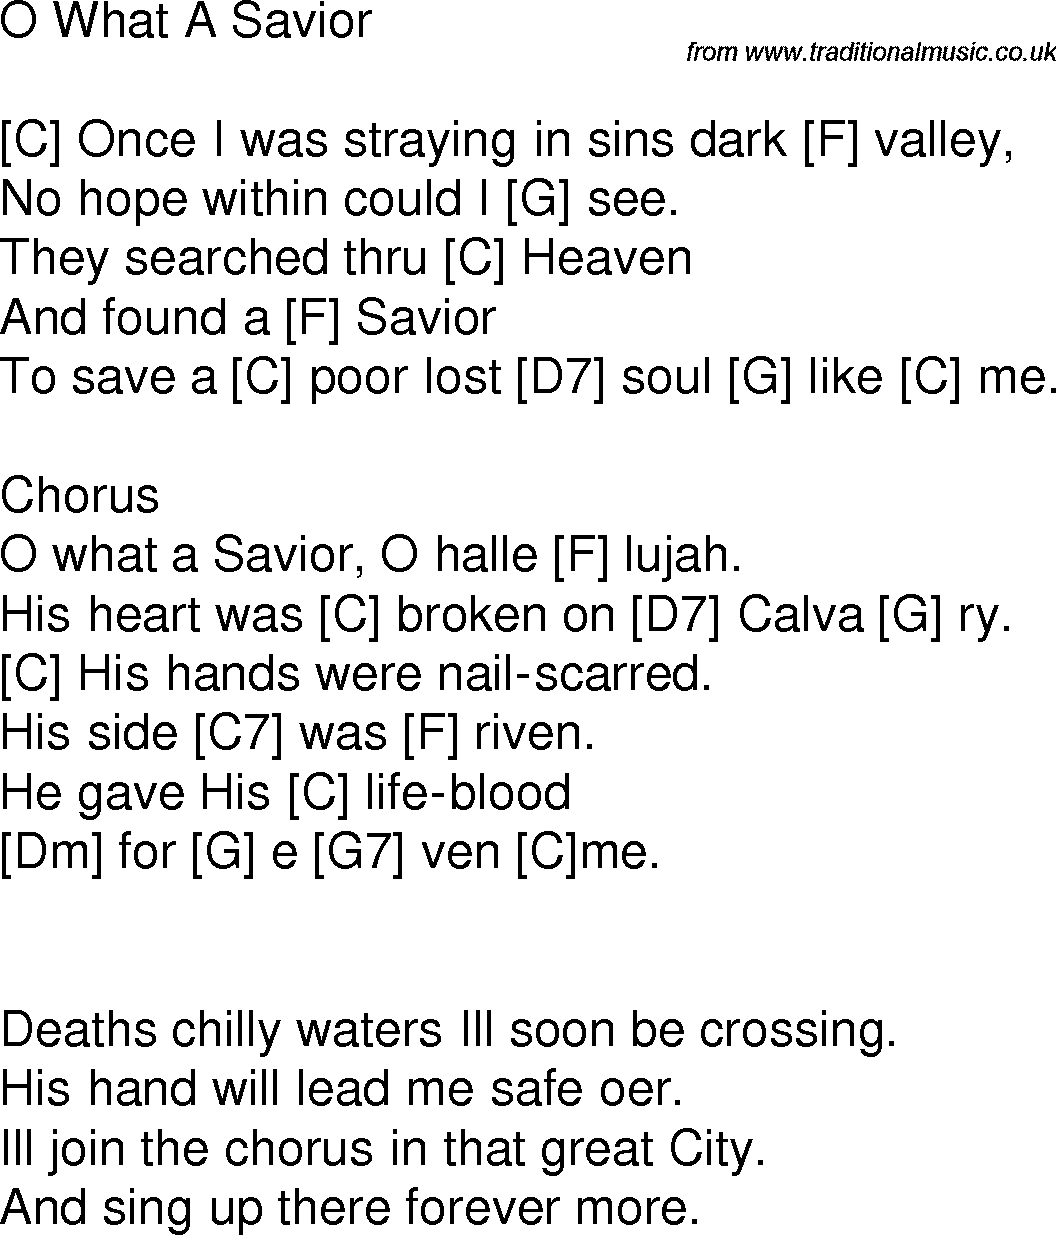 Old time song lyrics with chords for O What A Savior C